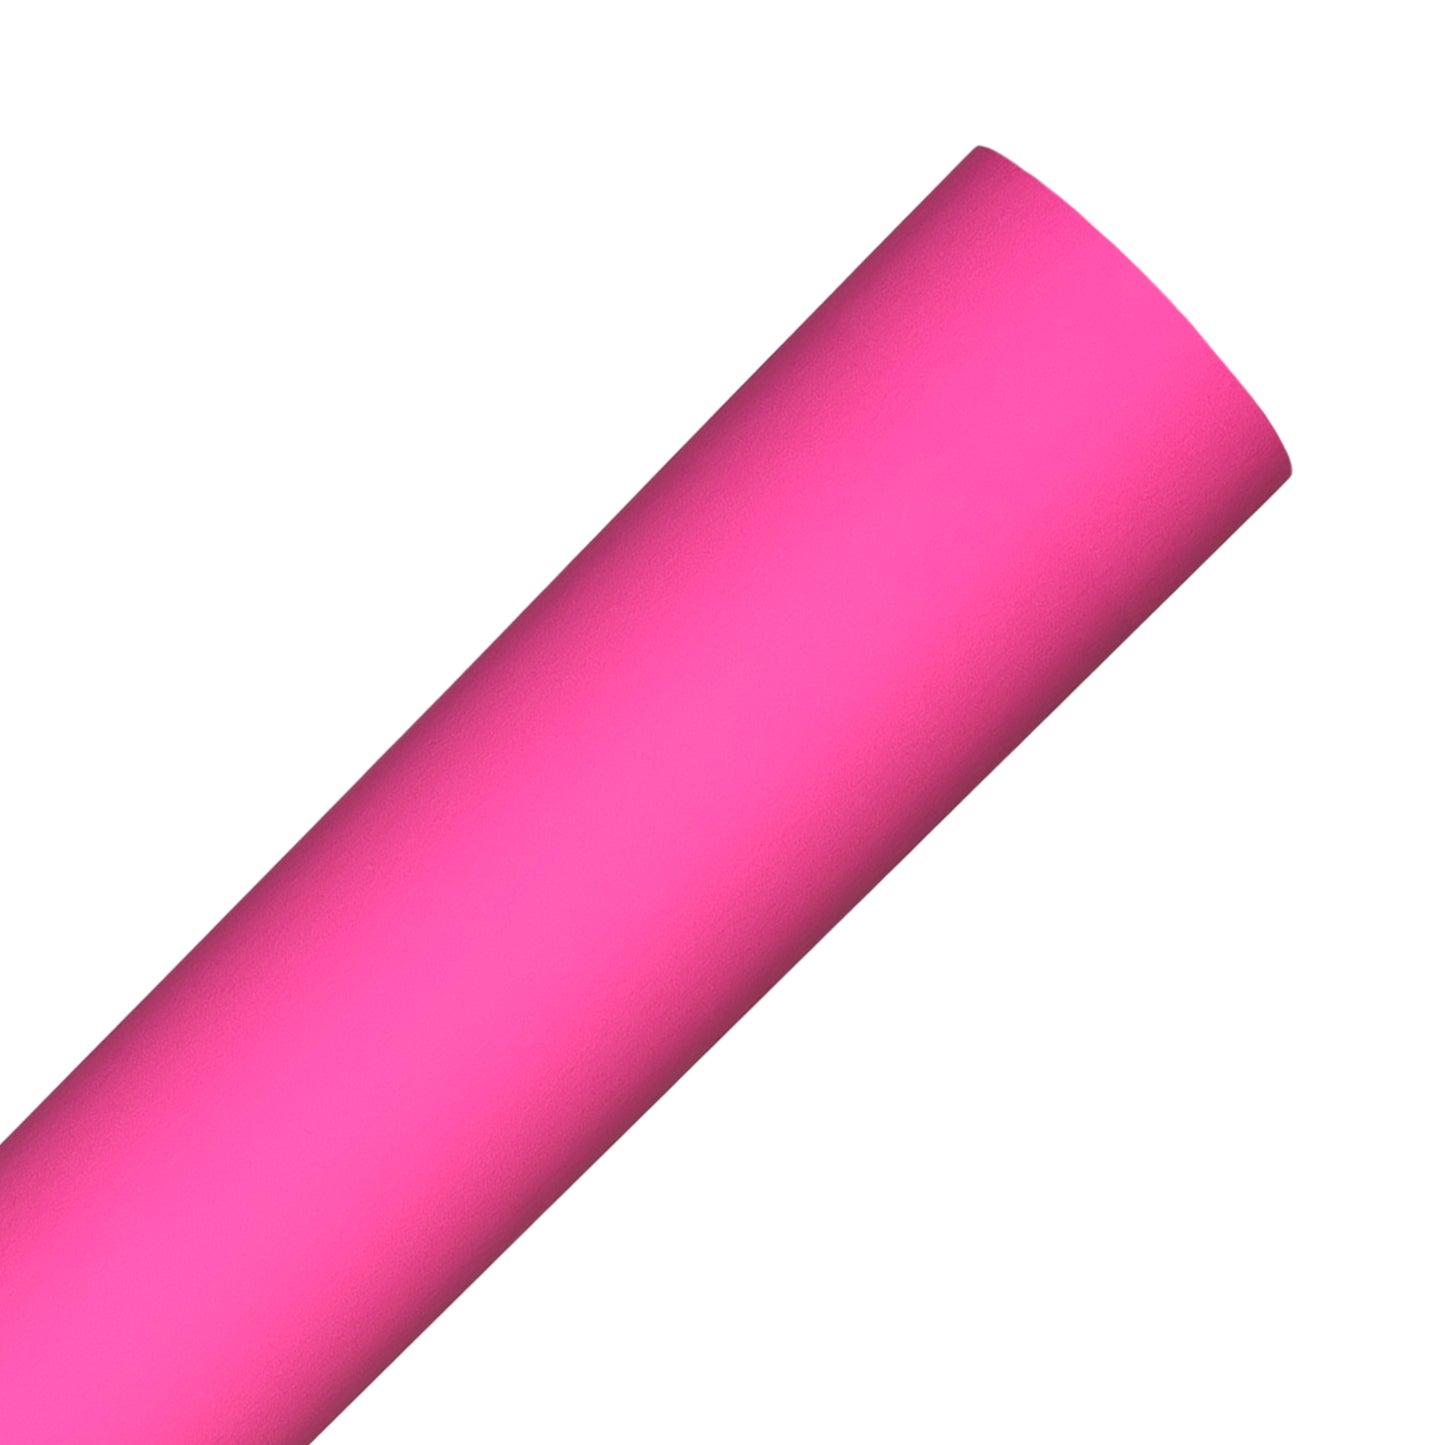 Neon Pink Silicone Heat Transfer Vinyl Rolls By Craftables